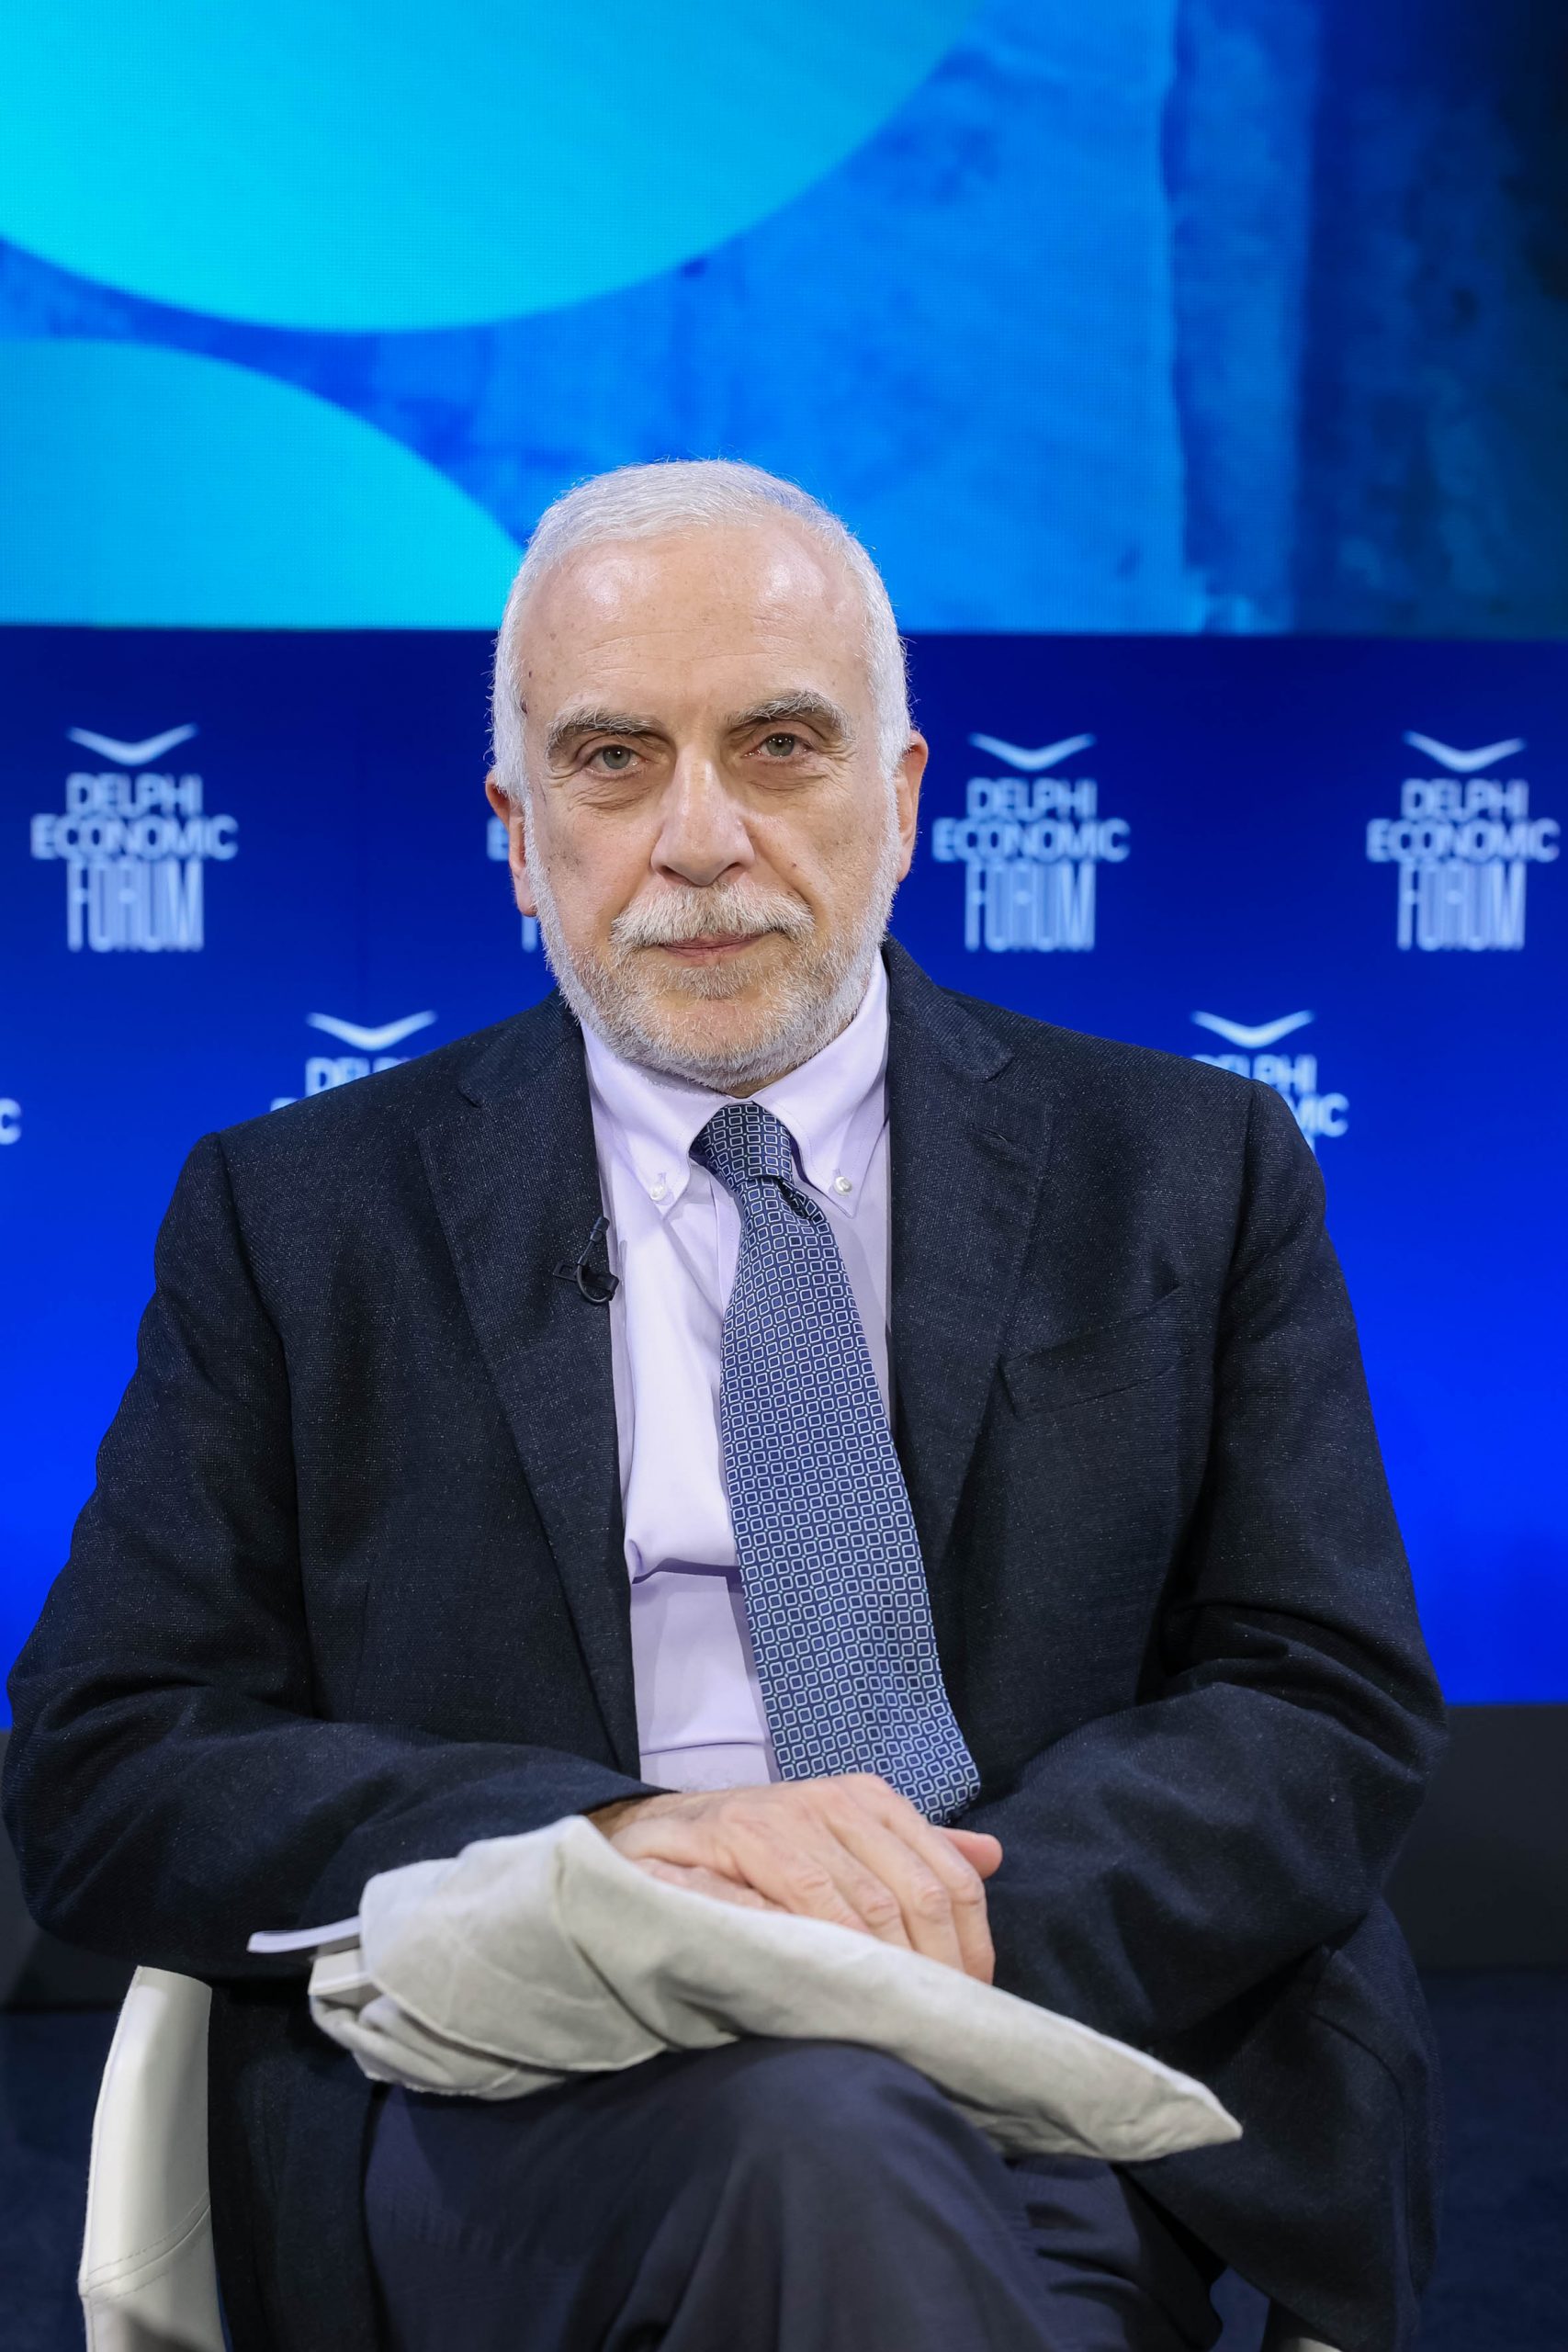 Soli Özel: Greek – Turkish Relations: There Is Reason to Be Optimistic